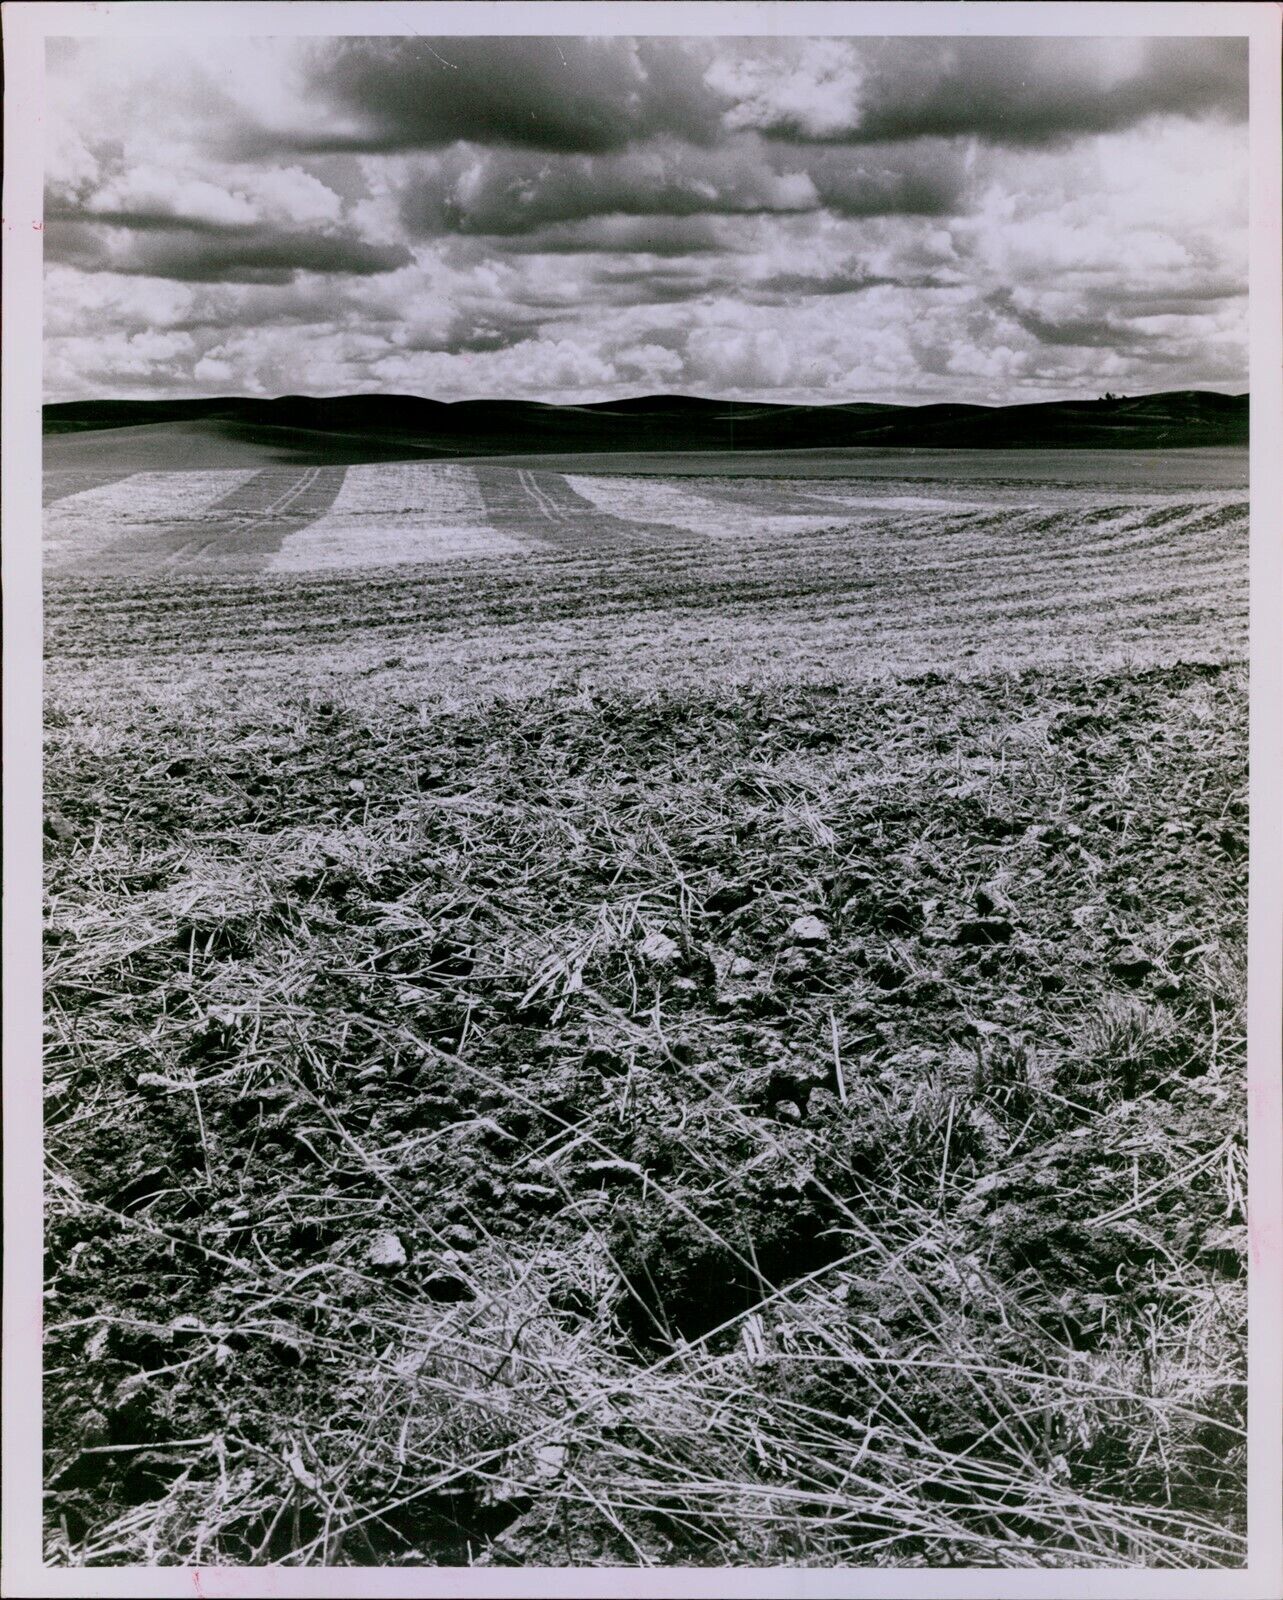 LG848 '81 Original Roy Scully Photo LAYER OF WIND DEPOSITED PALOUSE SOIL Erosion